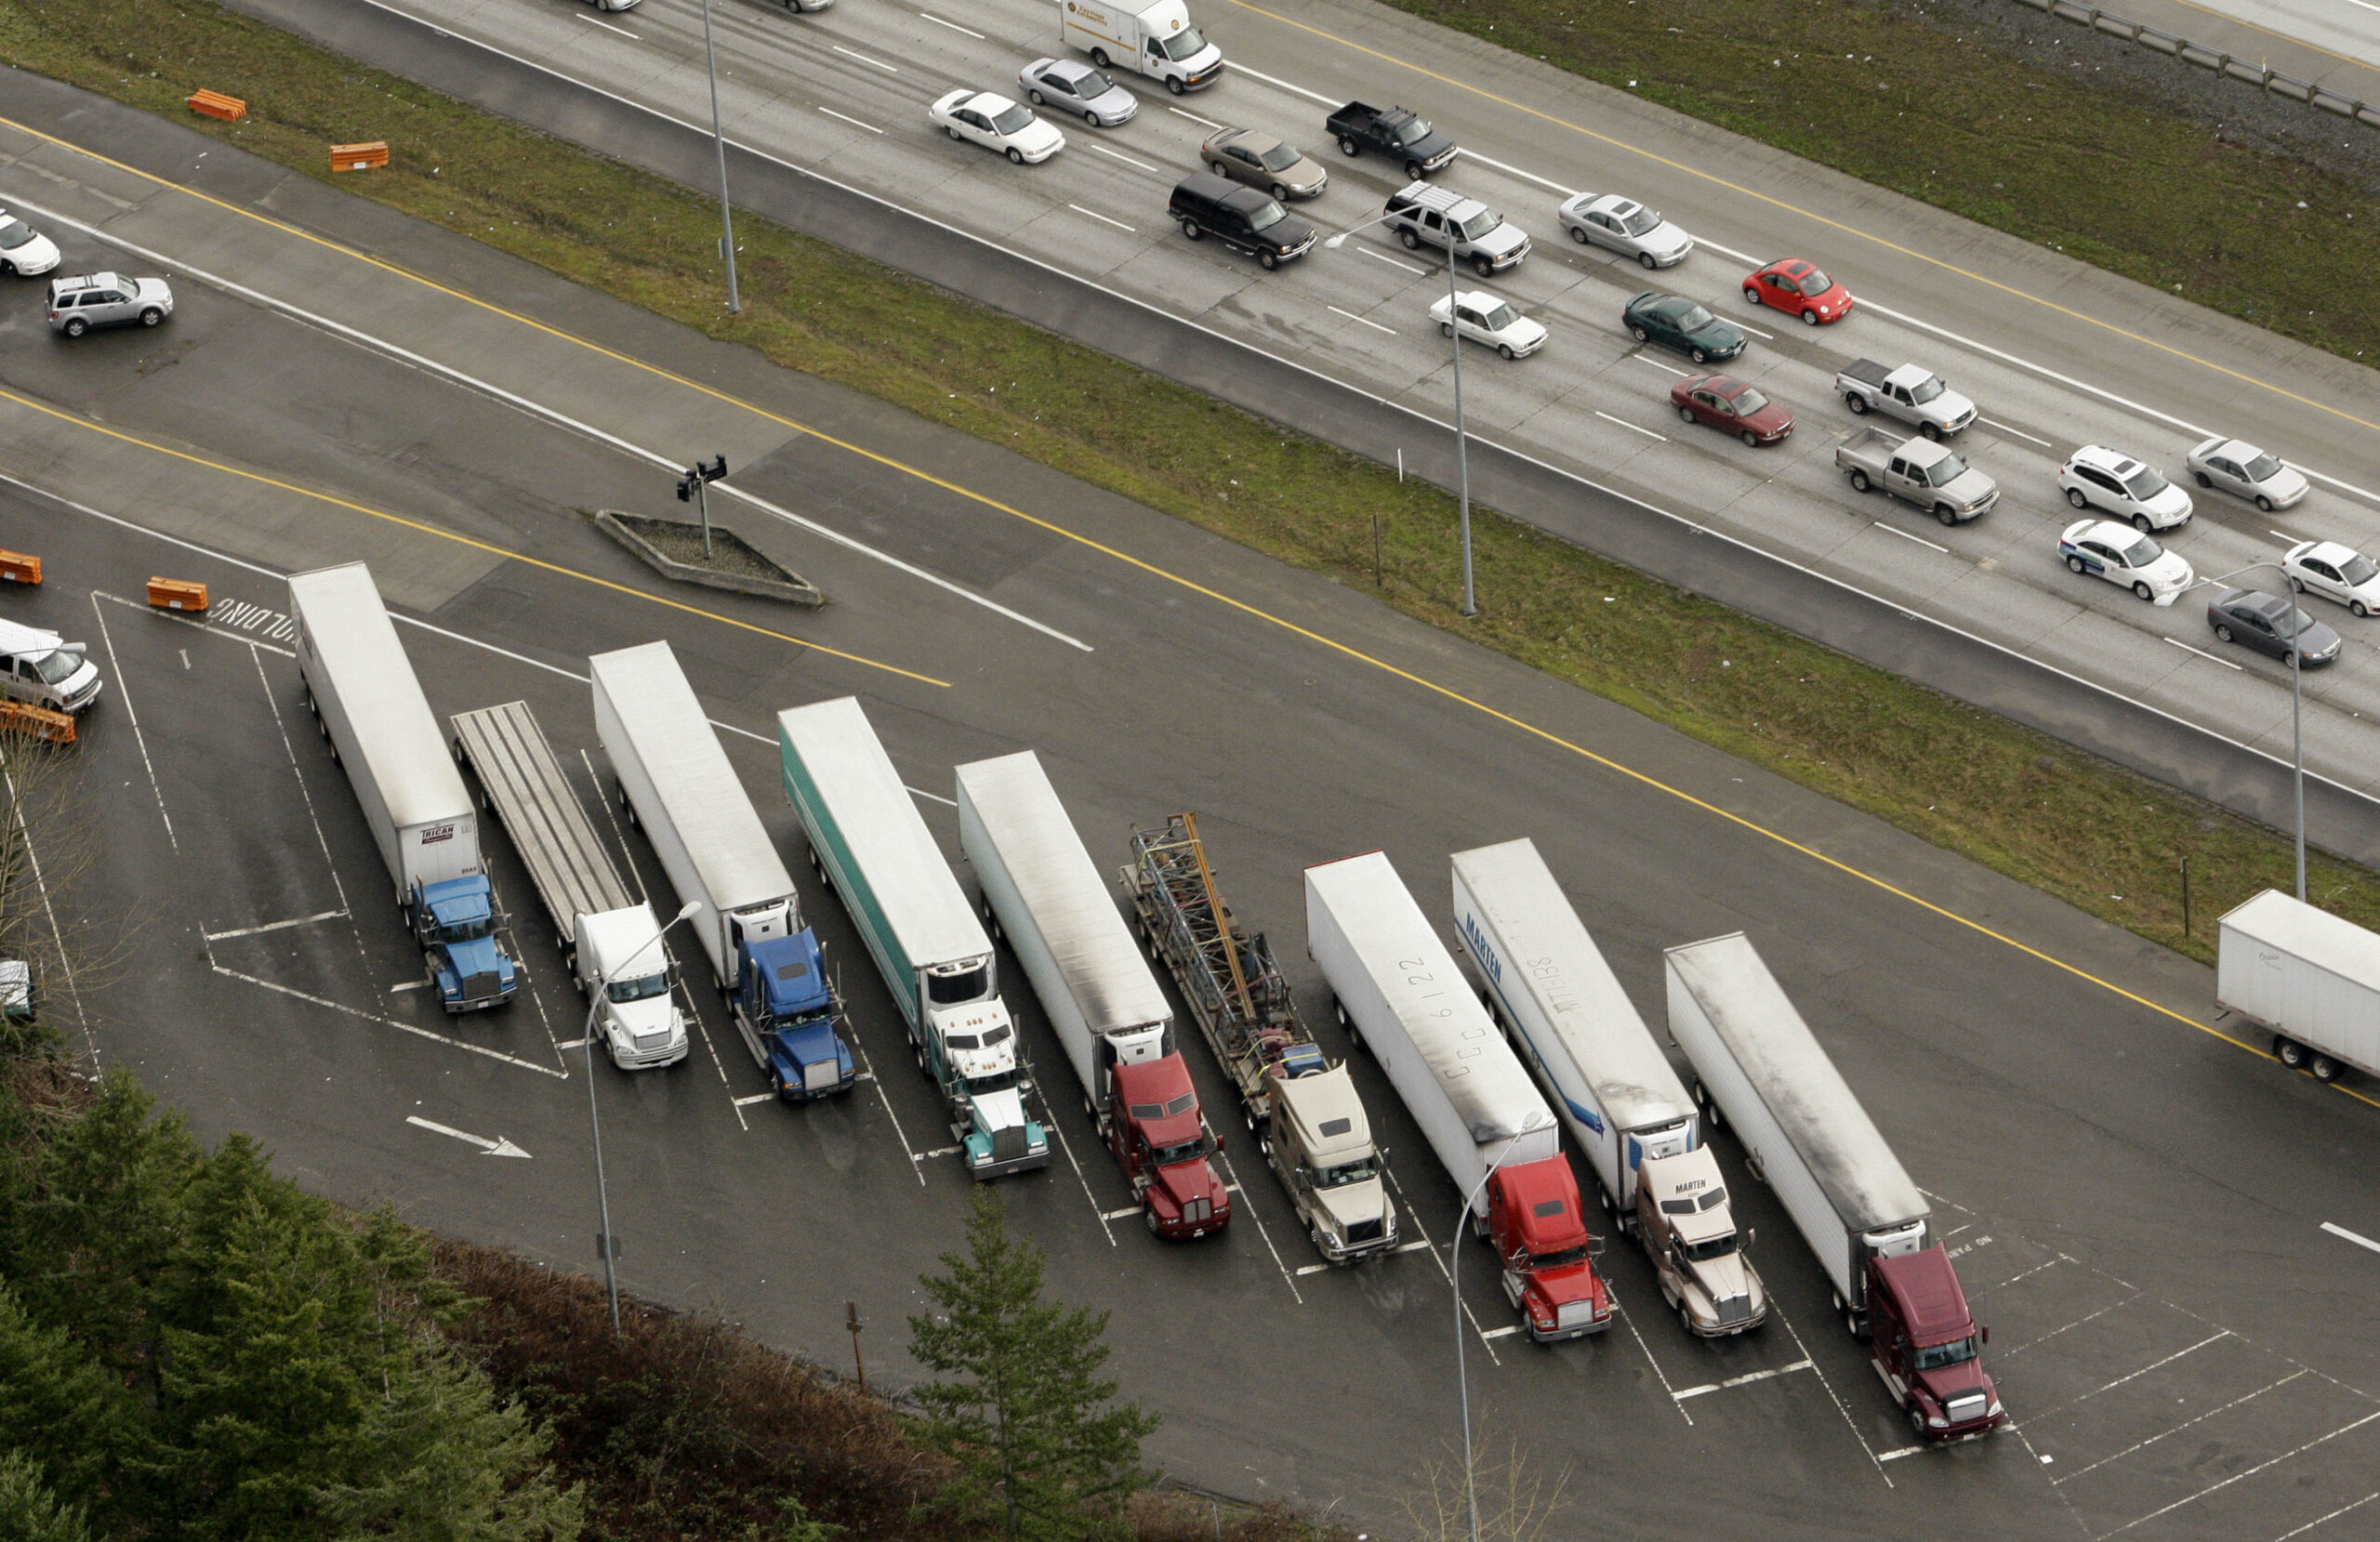 Semi trailer trucks fill slots at a weigh station as traffic passes